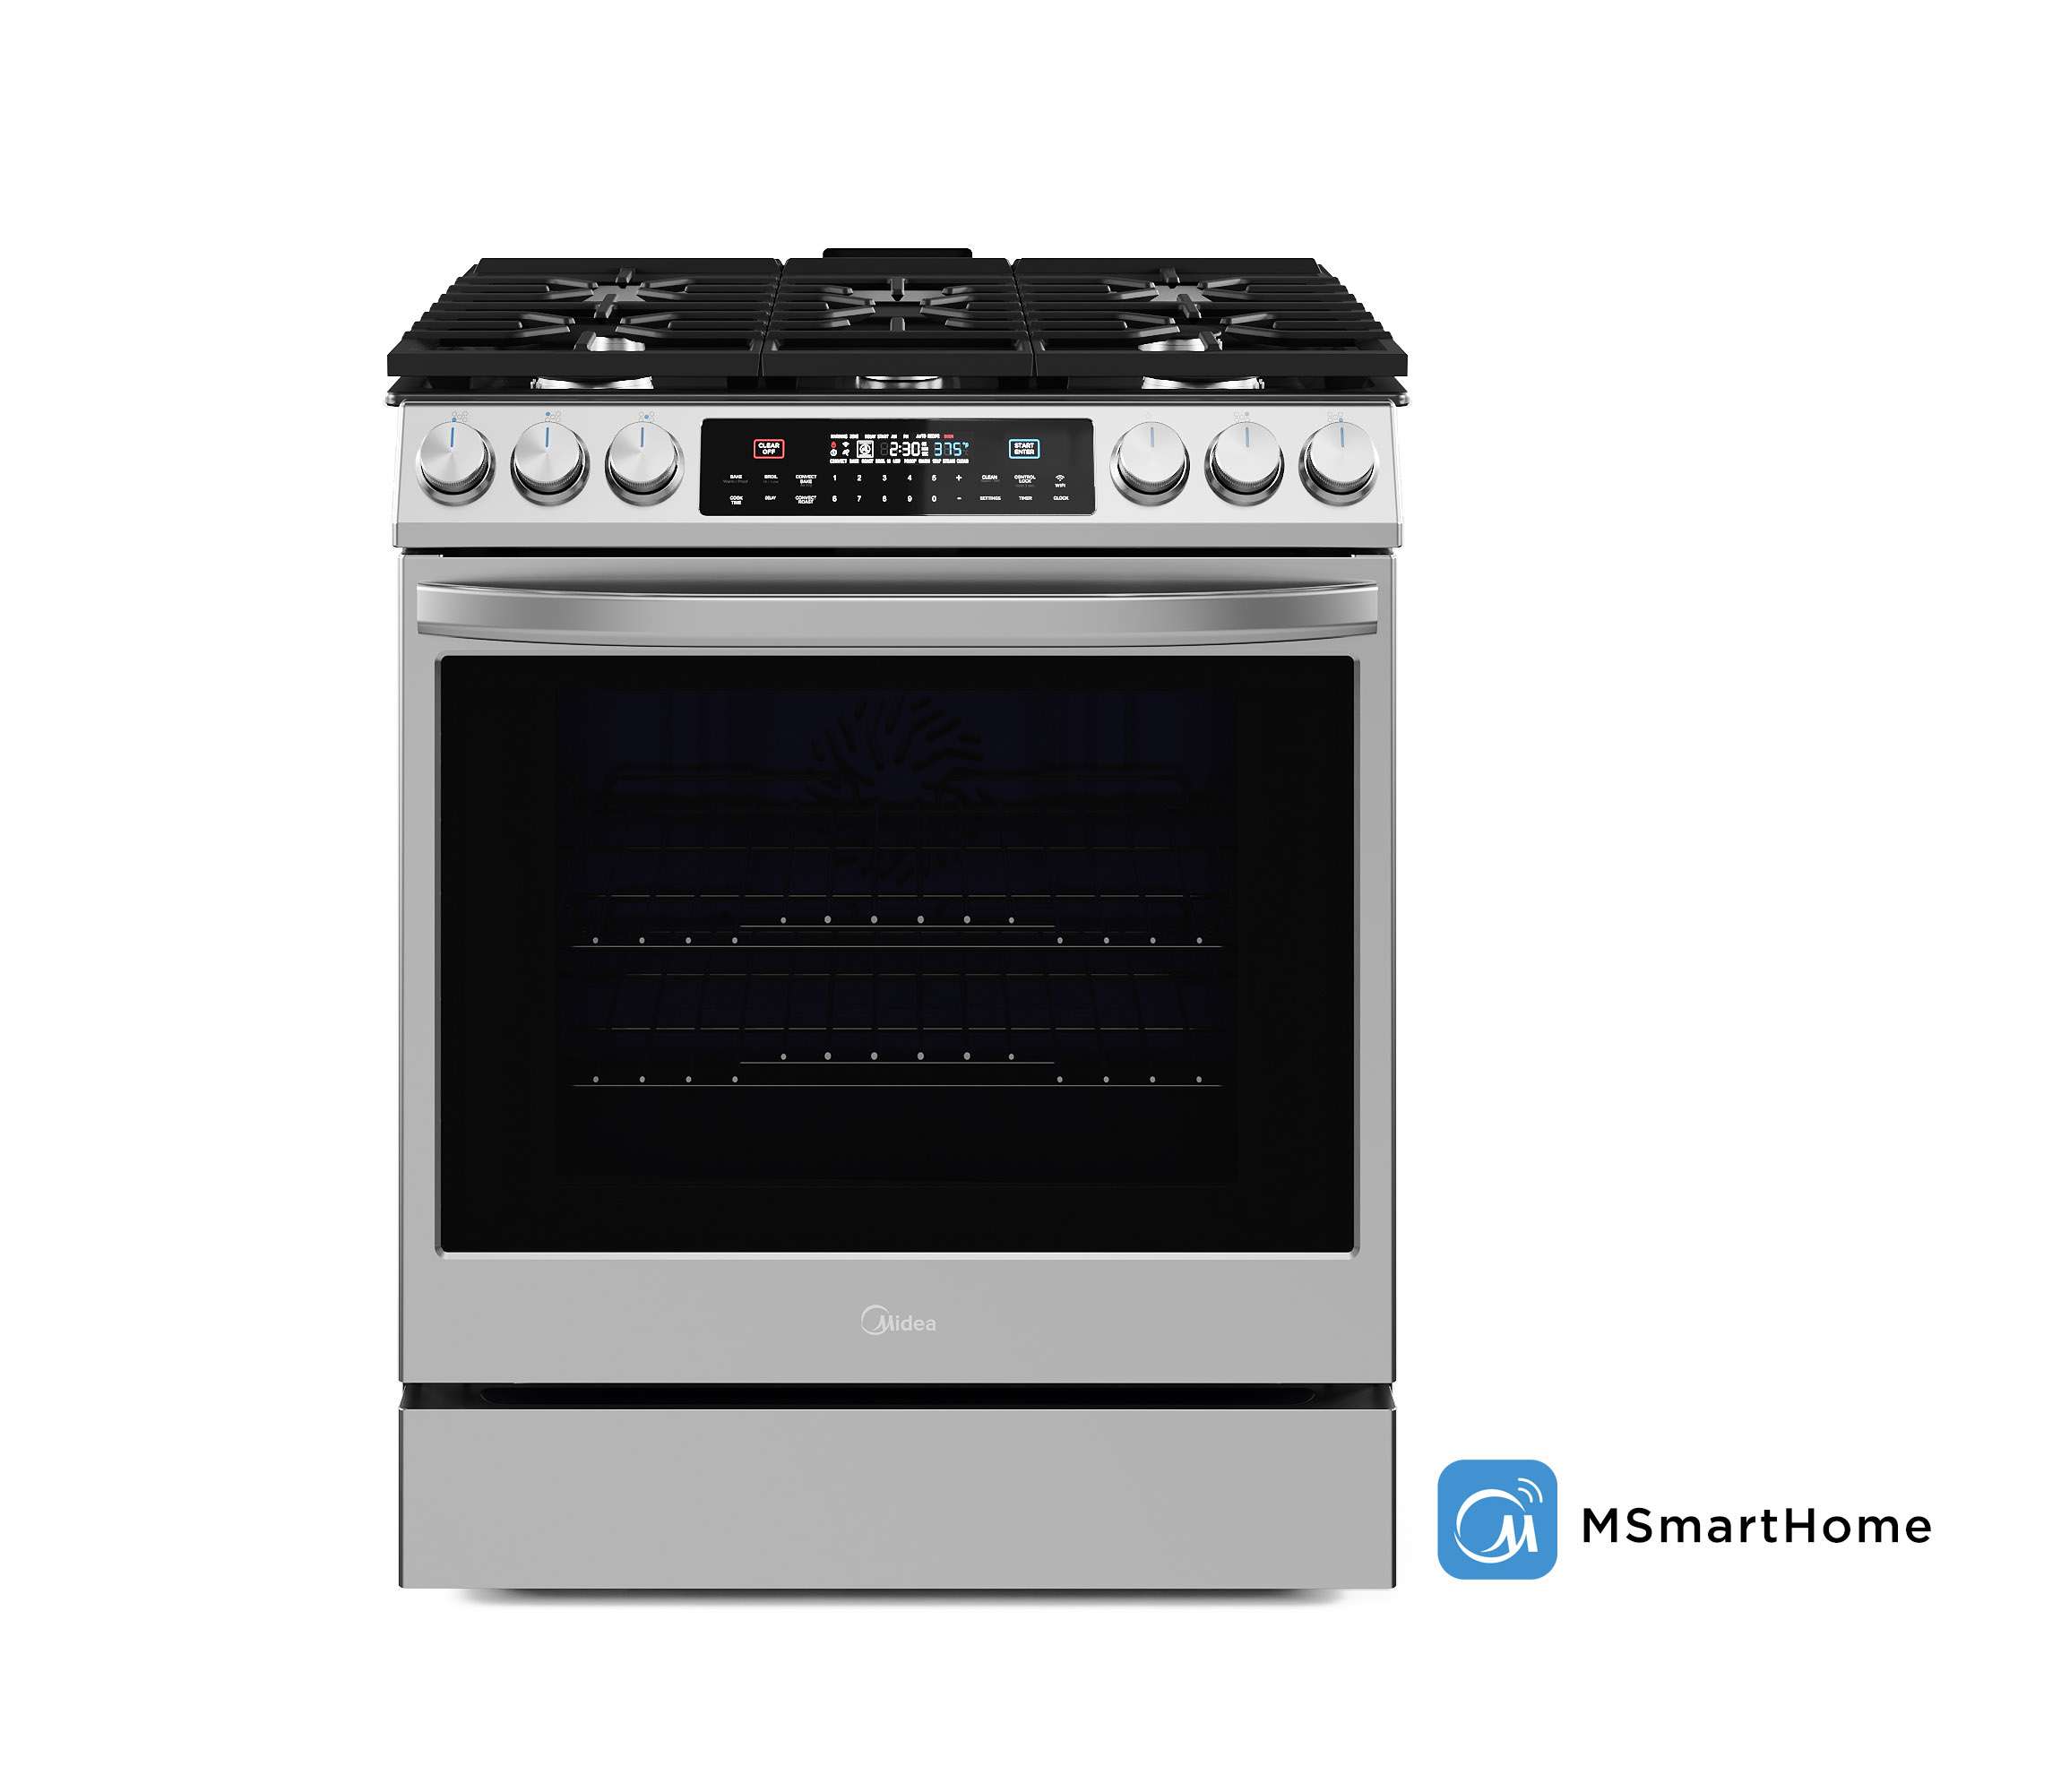 https://d1pjg4o0tbonat.cloudfront.net/content/dam/midea-aem/us/ranges/slide-in-gas-range-with-5-burners-and-air-fry-convection-mgs30s4ast/MGS302AST_Front.jpg/jcr:content/renditions/cq5dam.web.5000.5000.jpeg